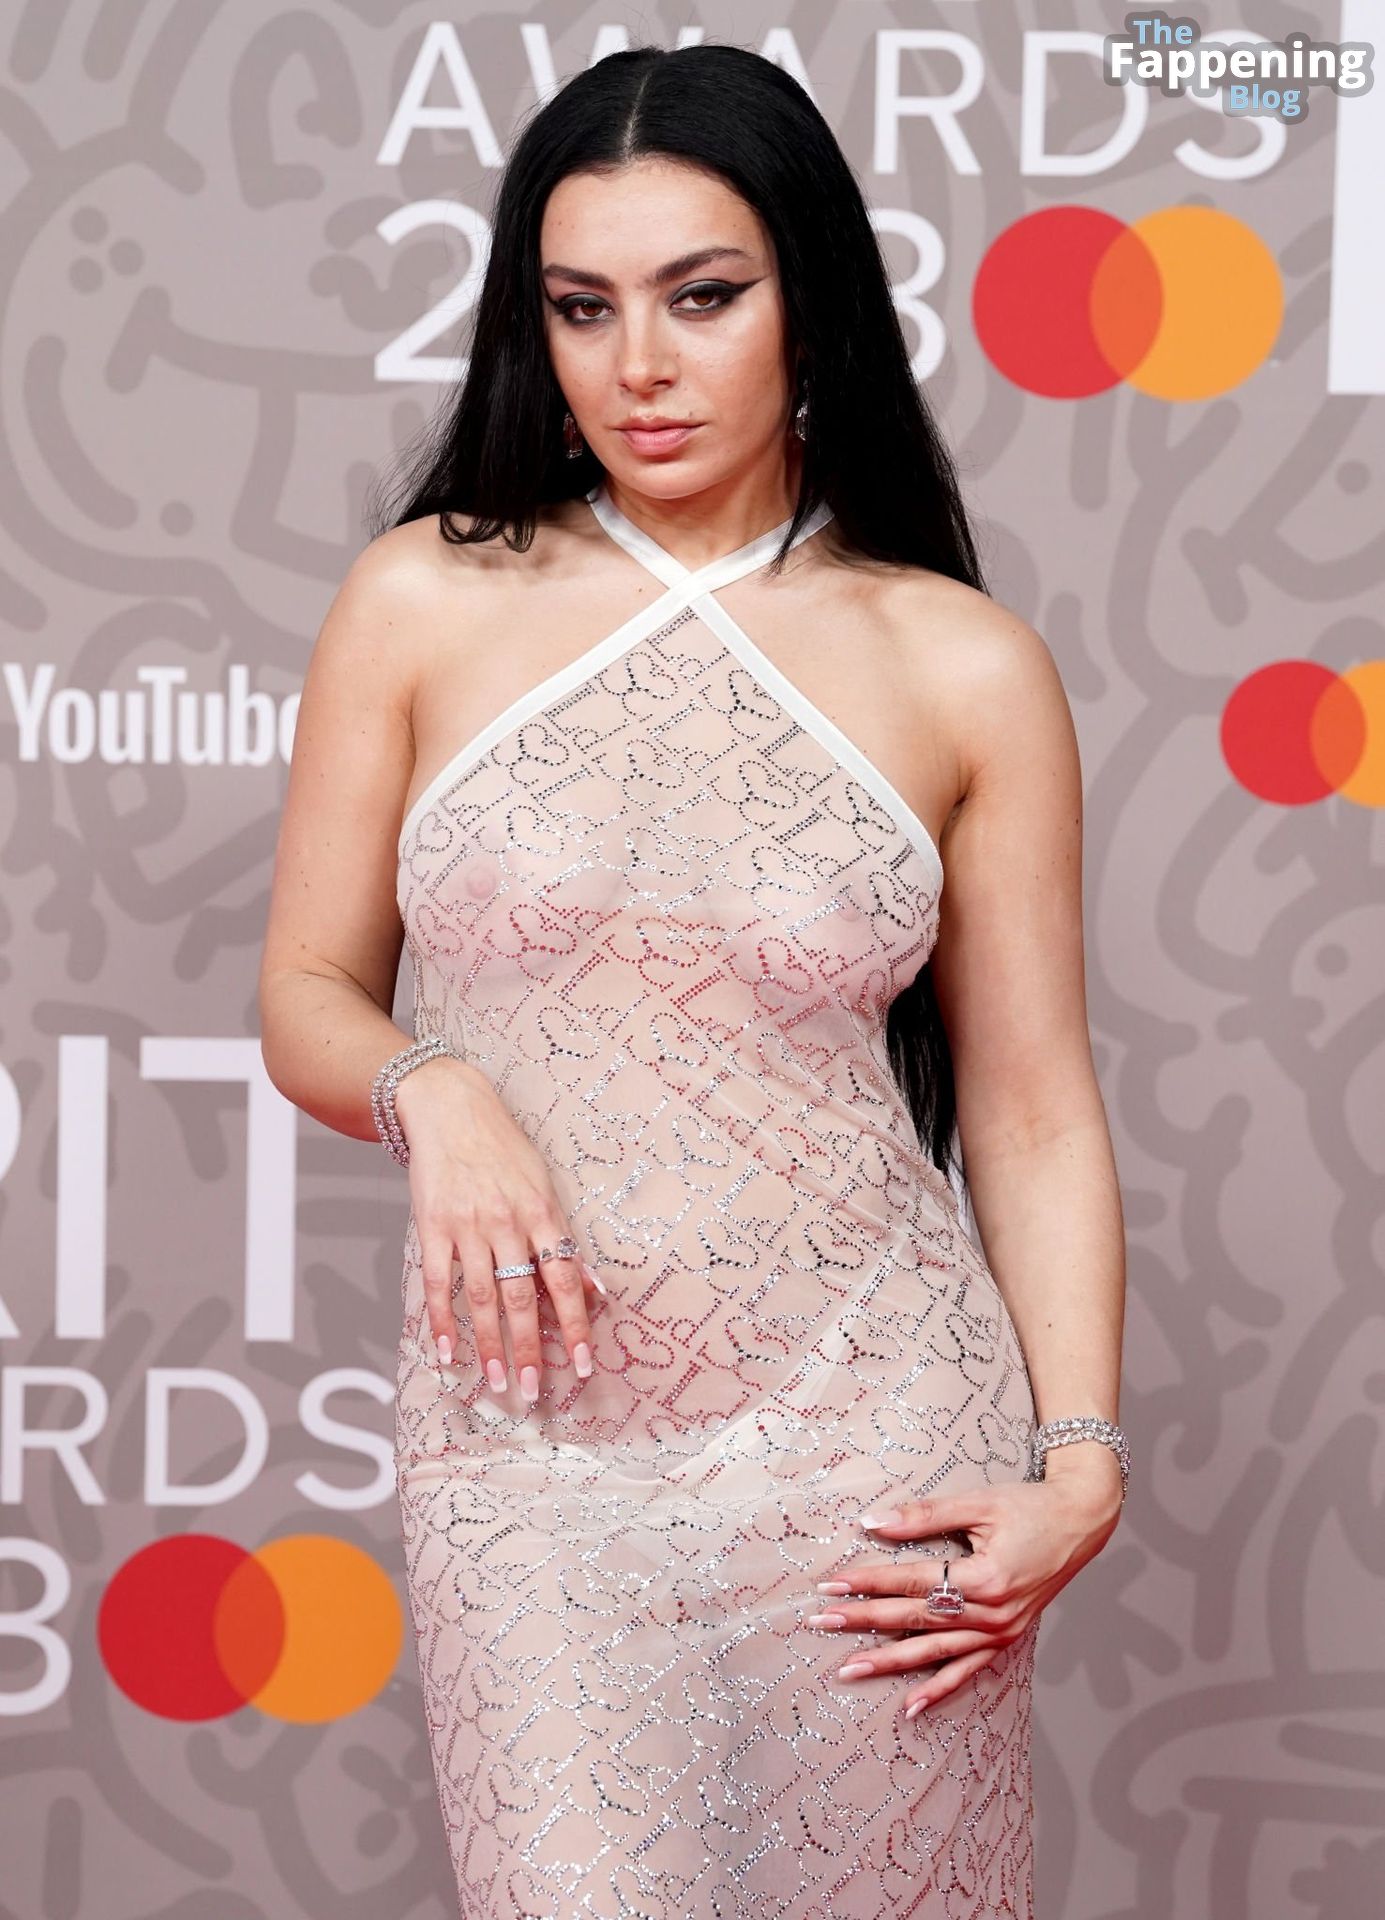 Charli XCX Flashes Her Nude Tits at the 2023 BRIT Awards in London (97 Photos)